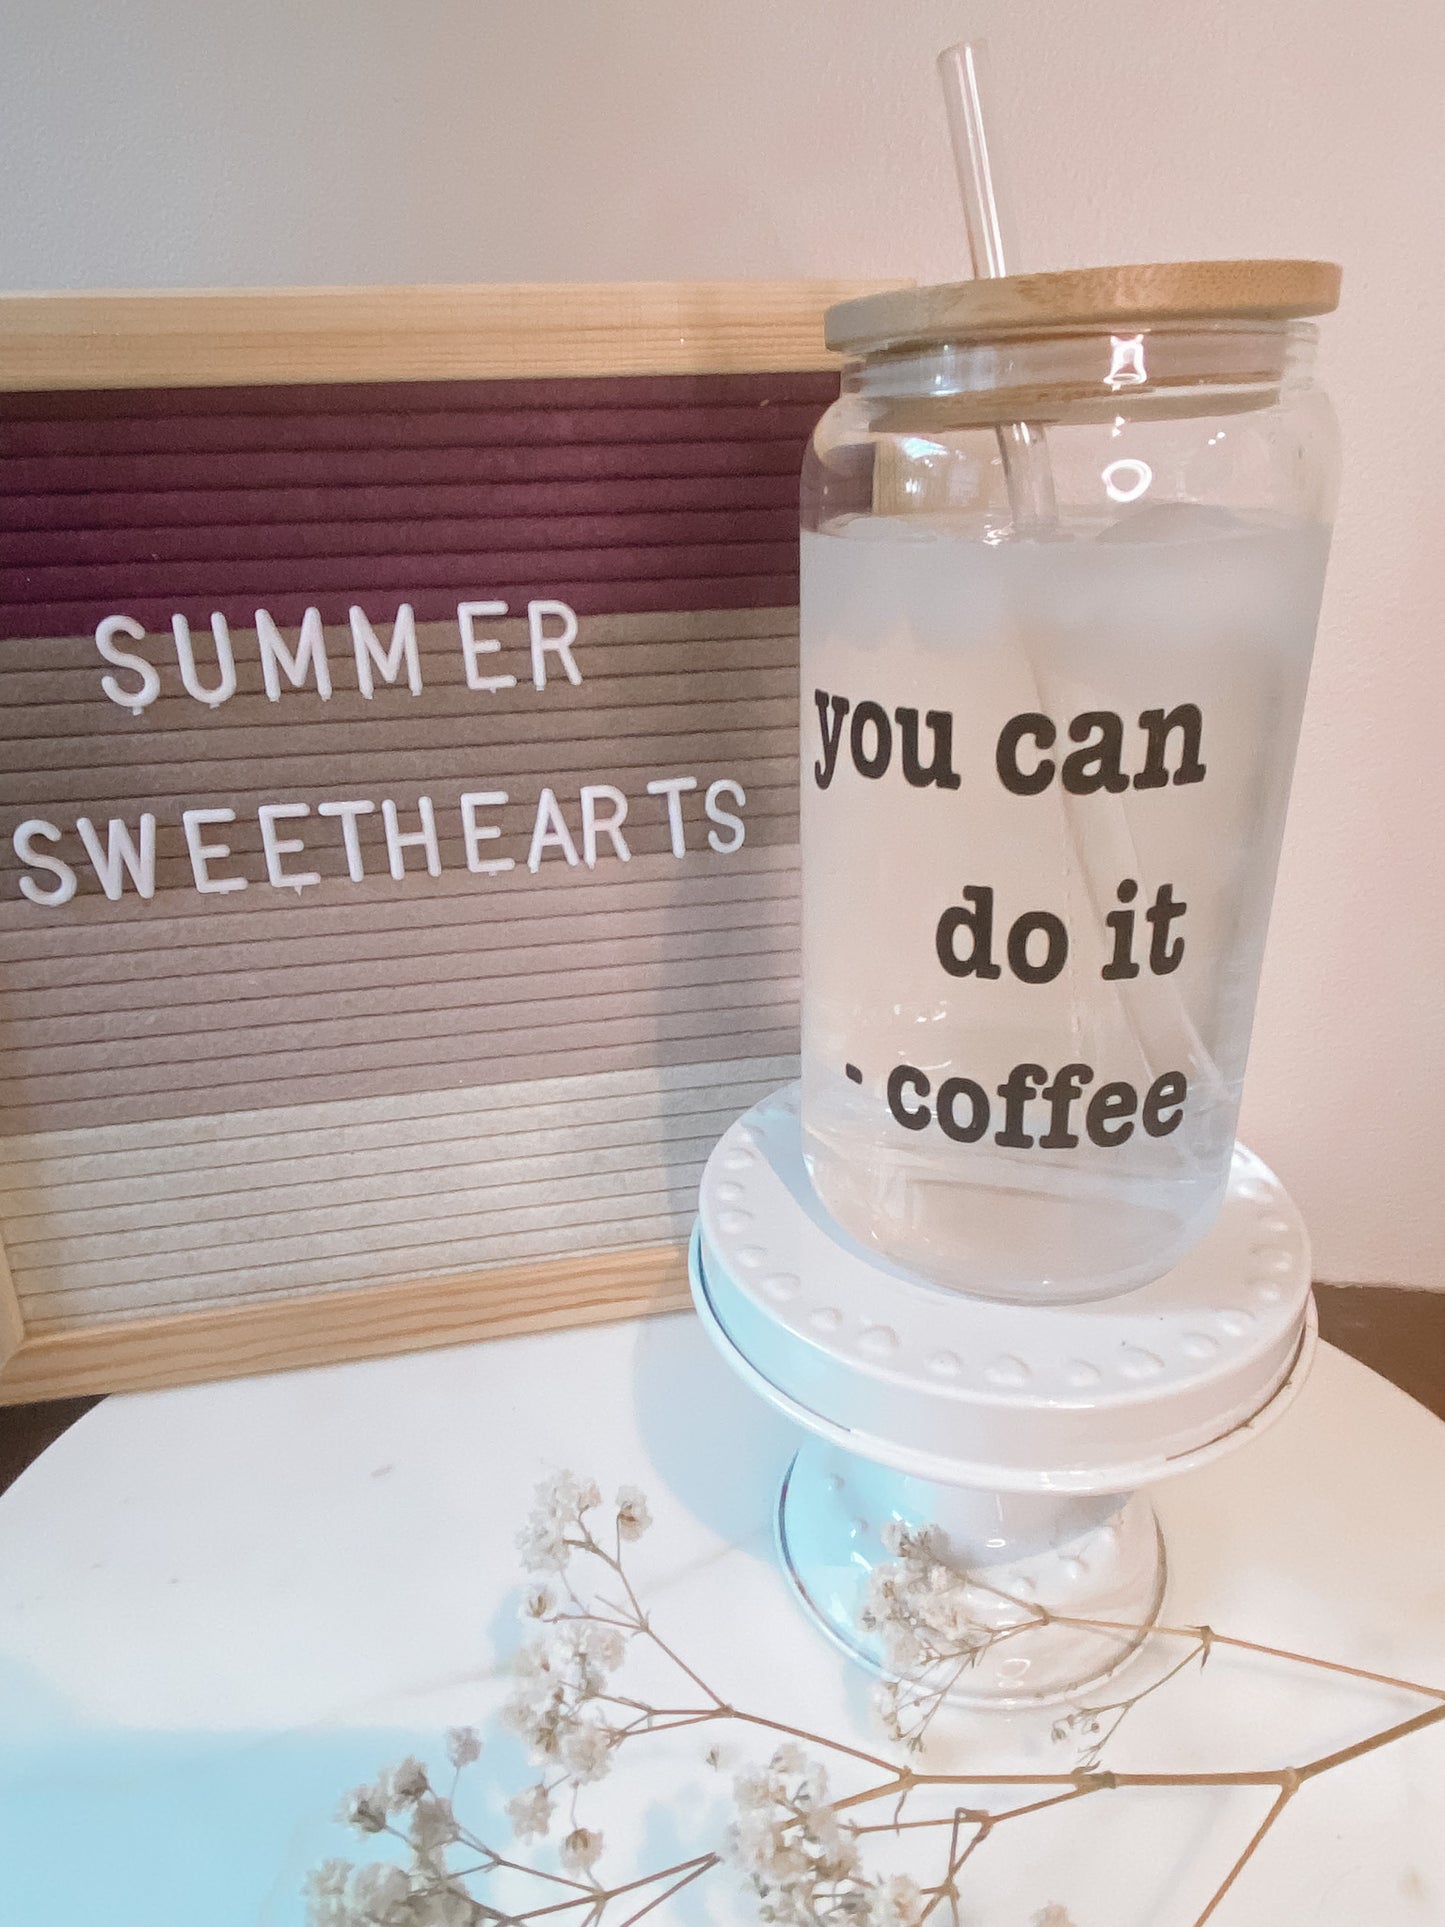 You Can Do it -Coffee Beer Glass Tumblr